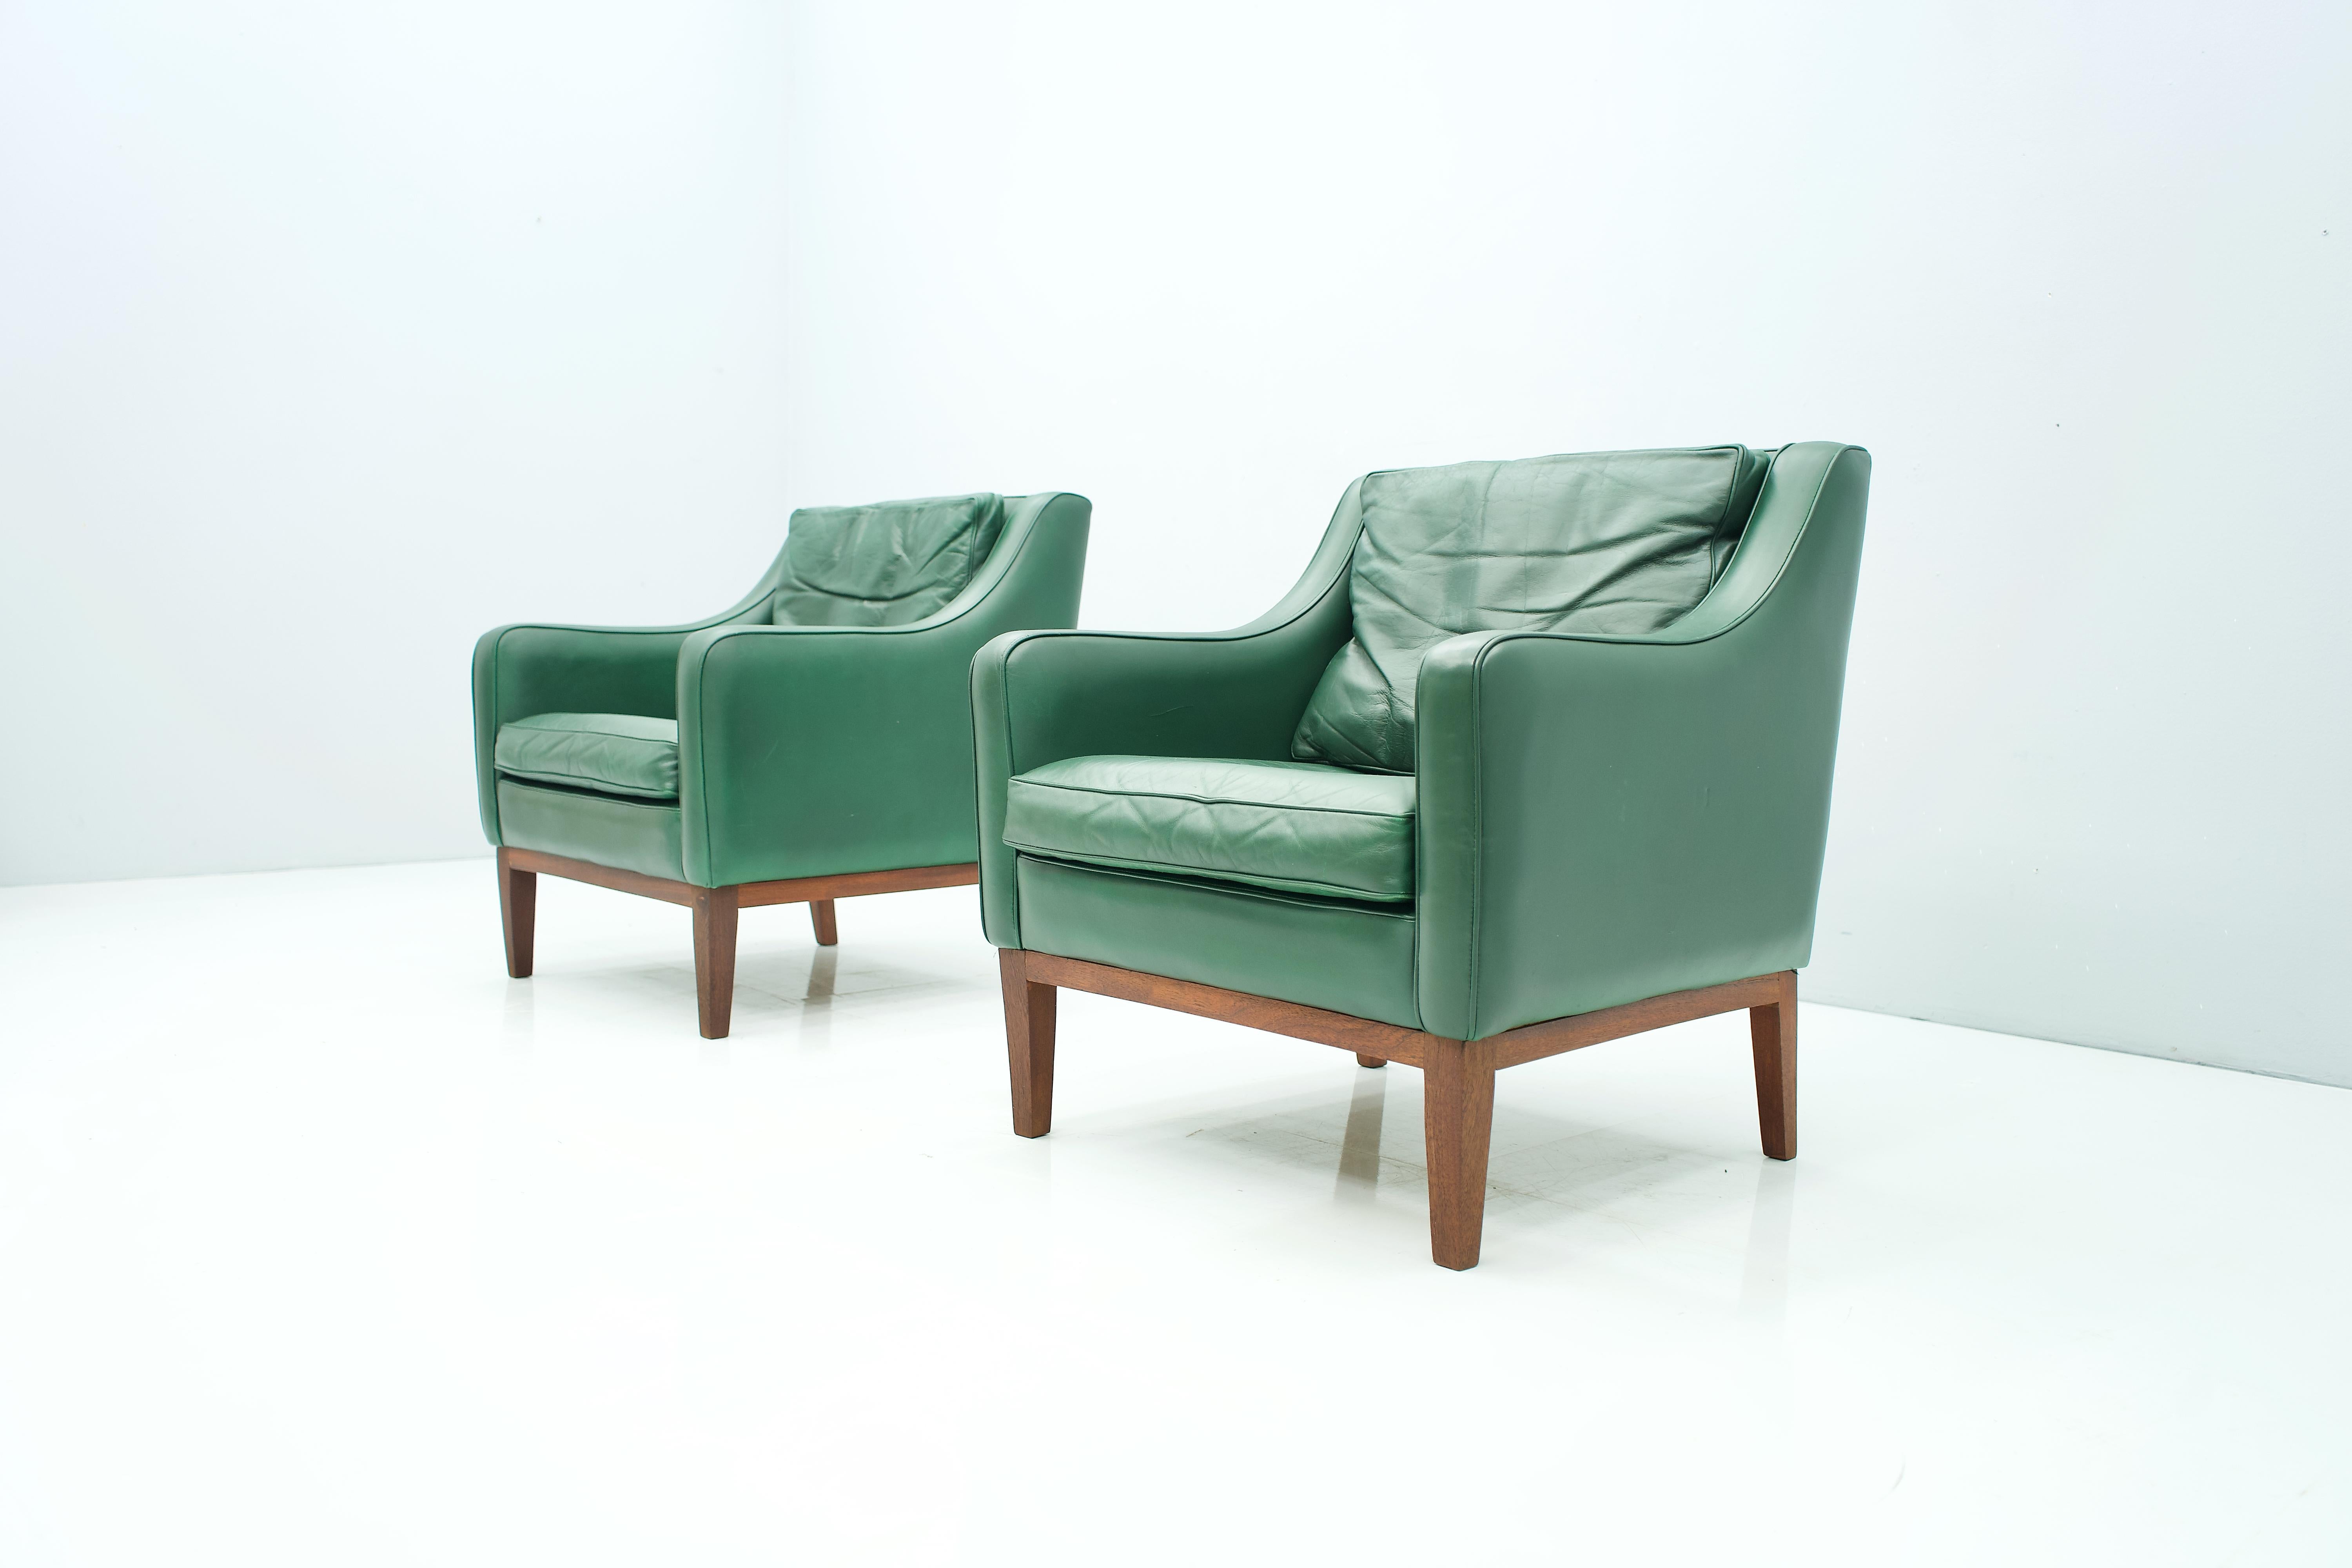 Pair of beautiful lounge chairs in green leather and wood frame (teak). The pillows are partly filled with down. The set was bought together with the matching 2-seat sofa in 1958. Origin Italy.
Measures: H 76.5 cm, W 70 cm, D 71 cm, SH 40 cm.
Good